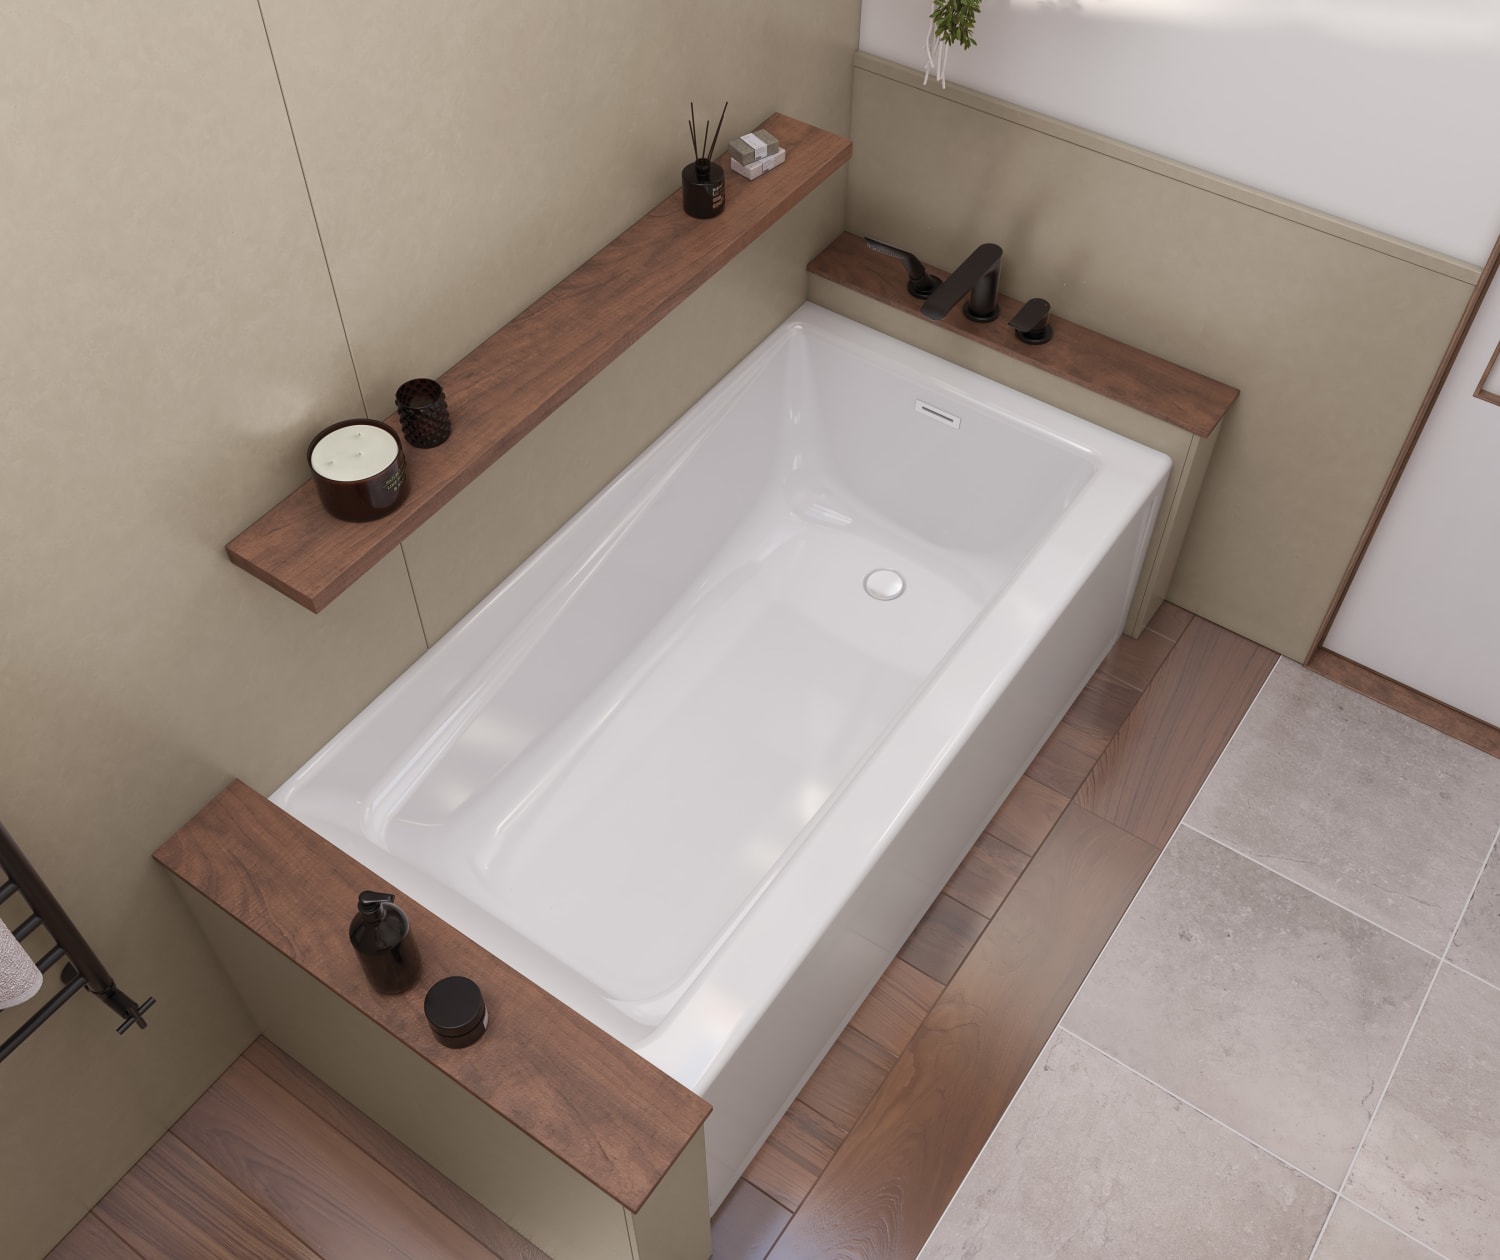 https://res.cloudinary.com/american-bath-group/image/upload/t_plp_pdp_product_image/v1685561380/abg-graphics/original-images/maax/professional/bathtubs/exhibit%20series/jpeg/Exhibit6030-White-Linear-Top-View-Deco-drain-white.jpg